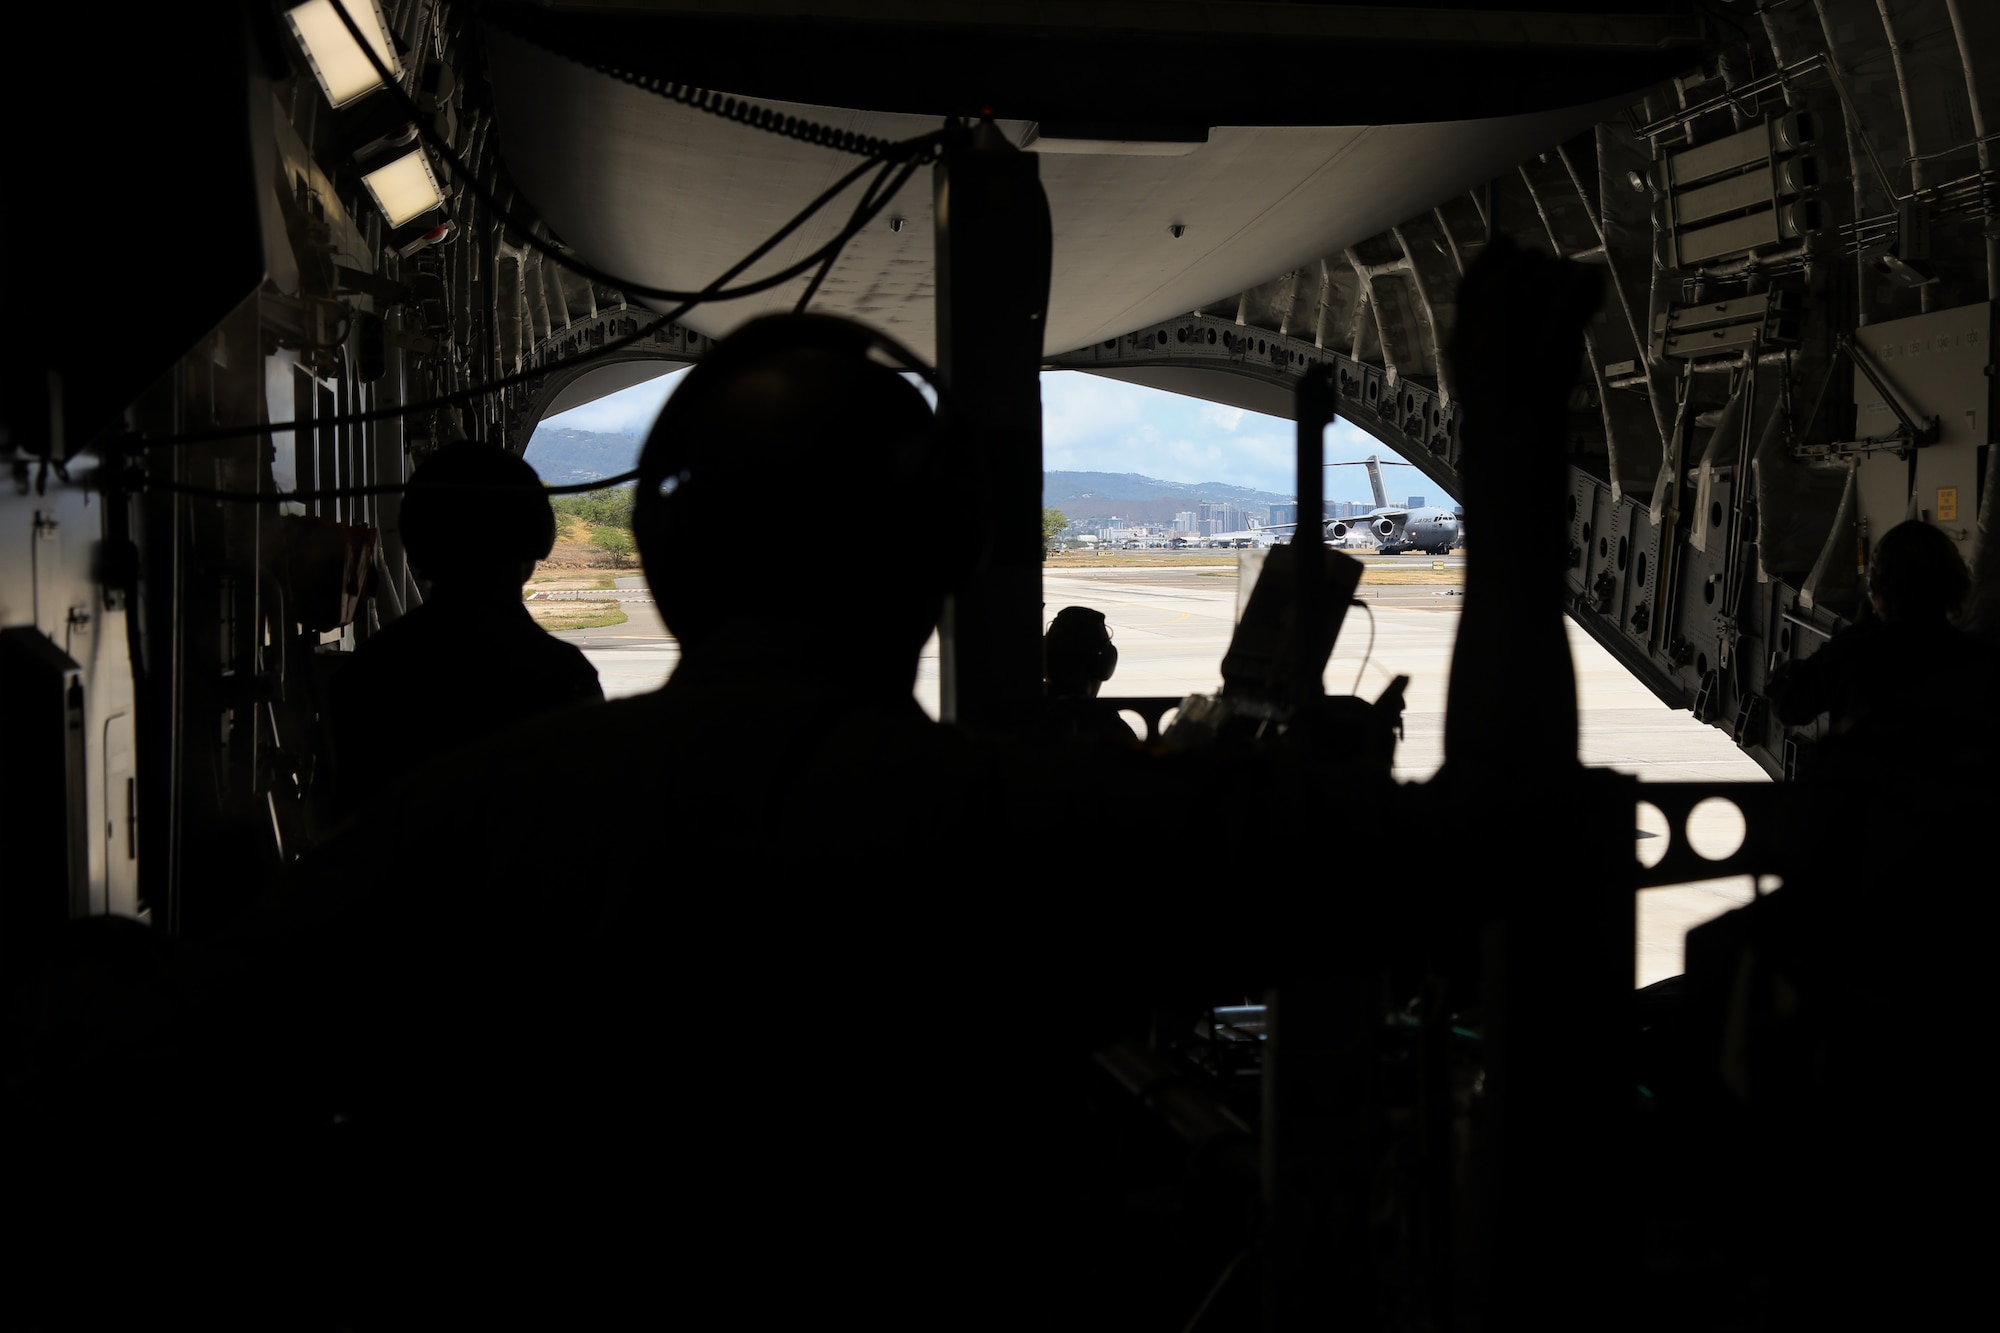 A C-17 Globemaster III carrying live mock causality patients from Joint Base Lewis – McChord lands at Joint Base Pearl Harbor - Hickam on July 9, 2018. Members of the 446th Aeromedical Squadron typically train with medical dummies, but for this training event used volunteers from the U.S. Army and U.S. Air Force. (U.S. Air Force photo by David L. Yost)